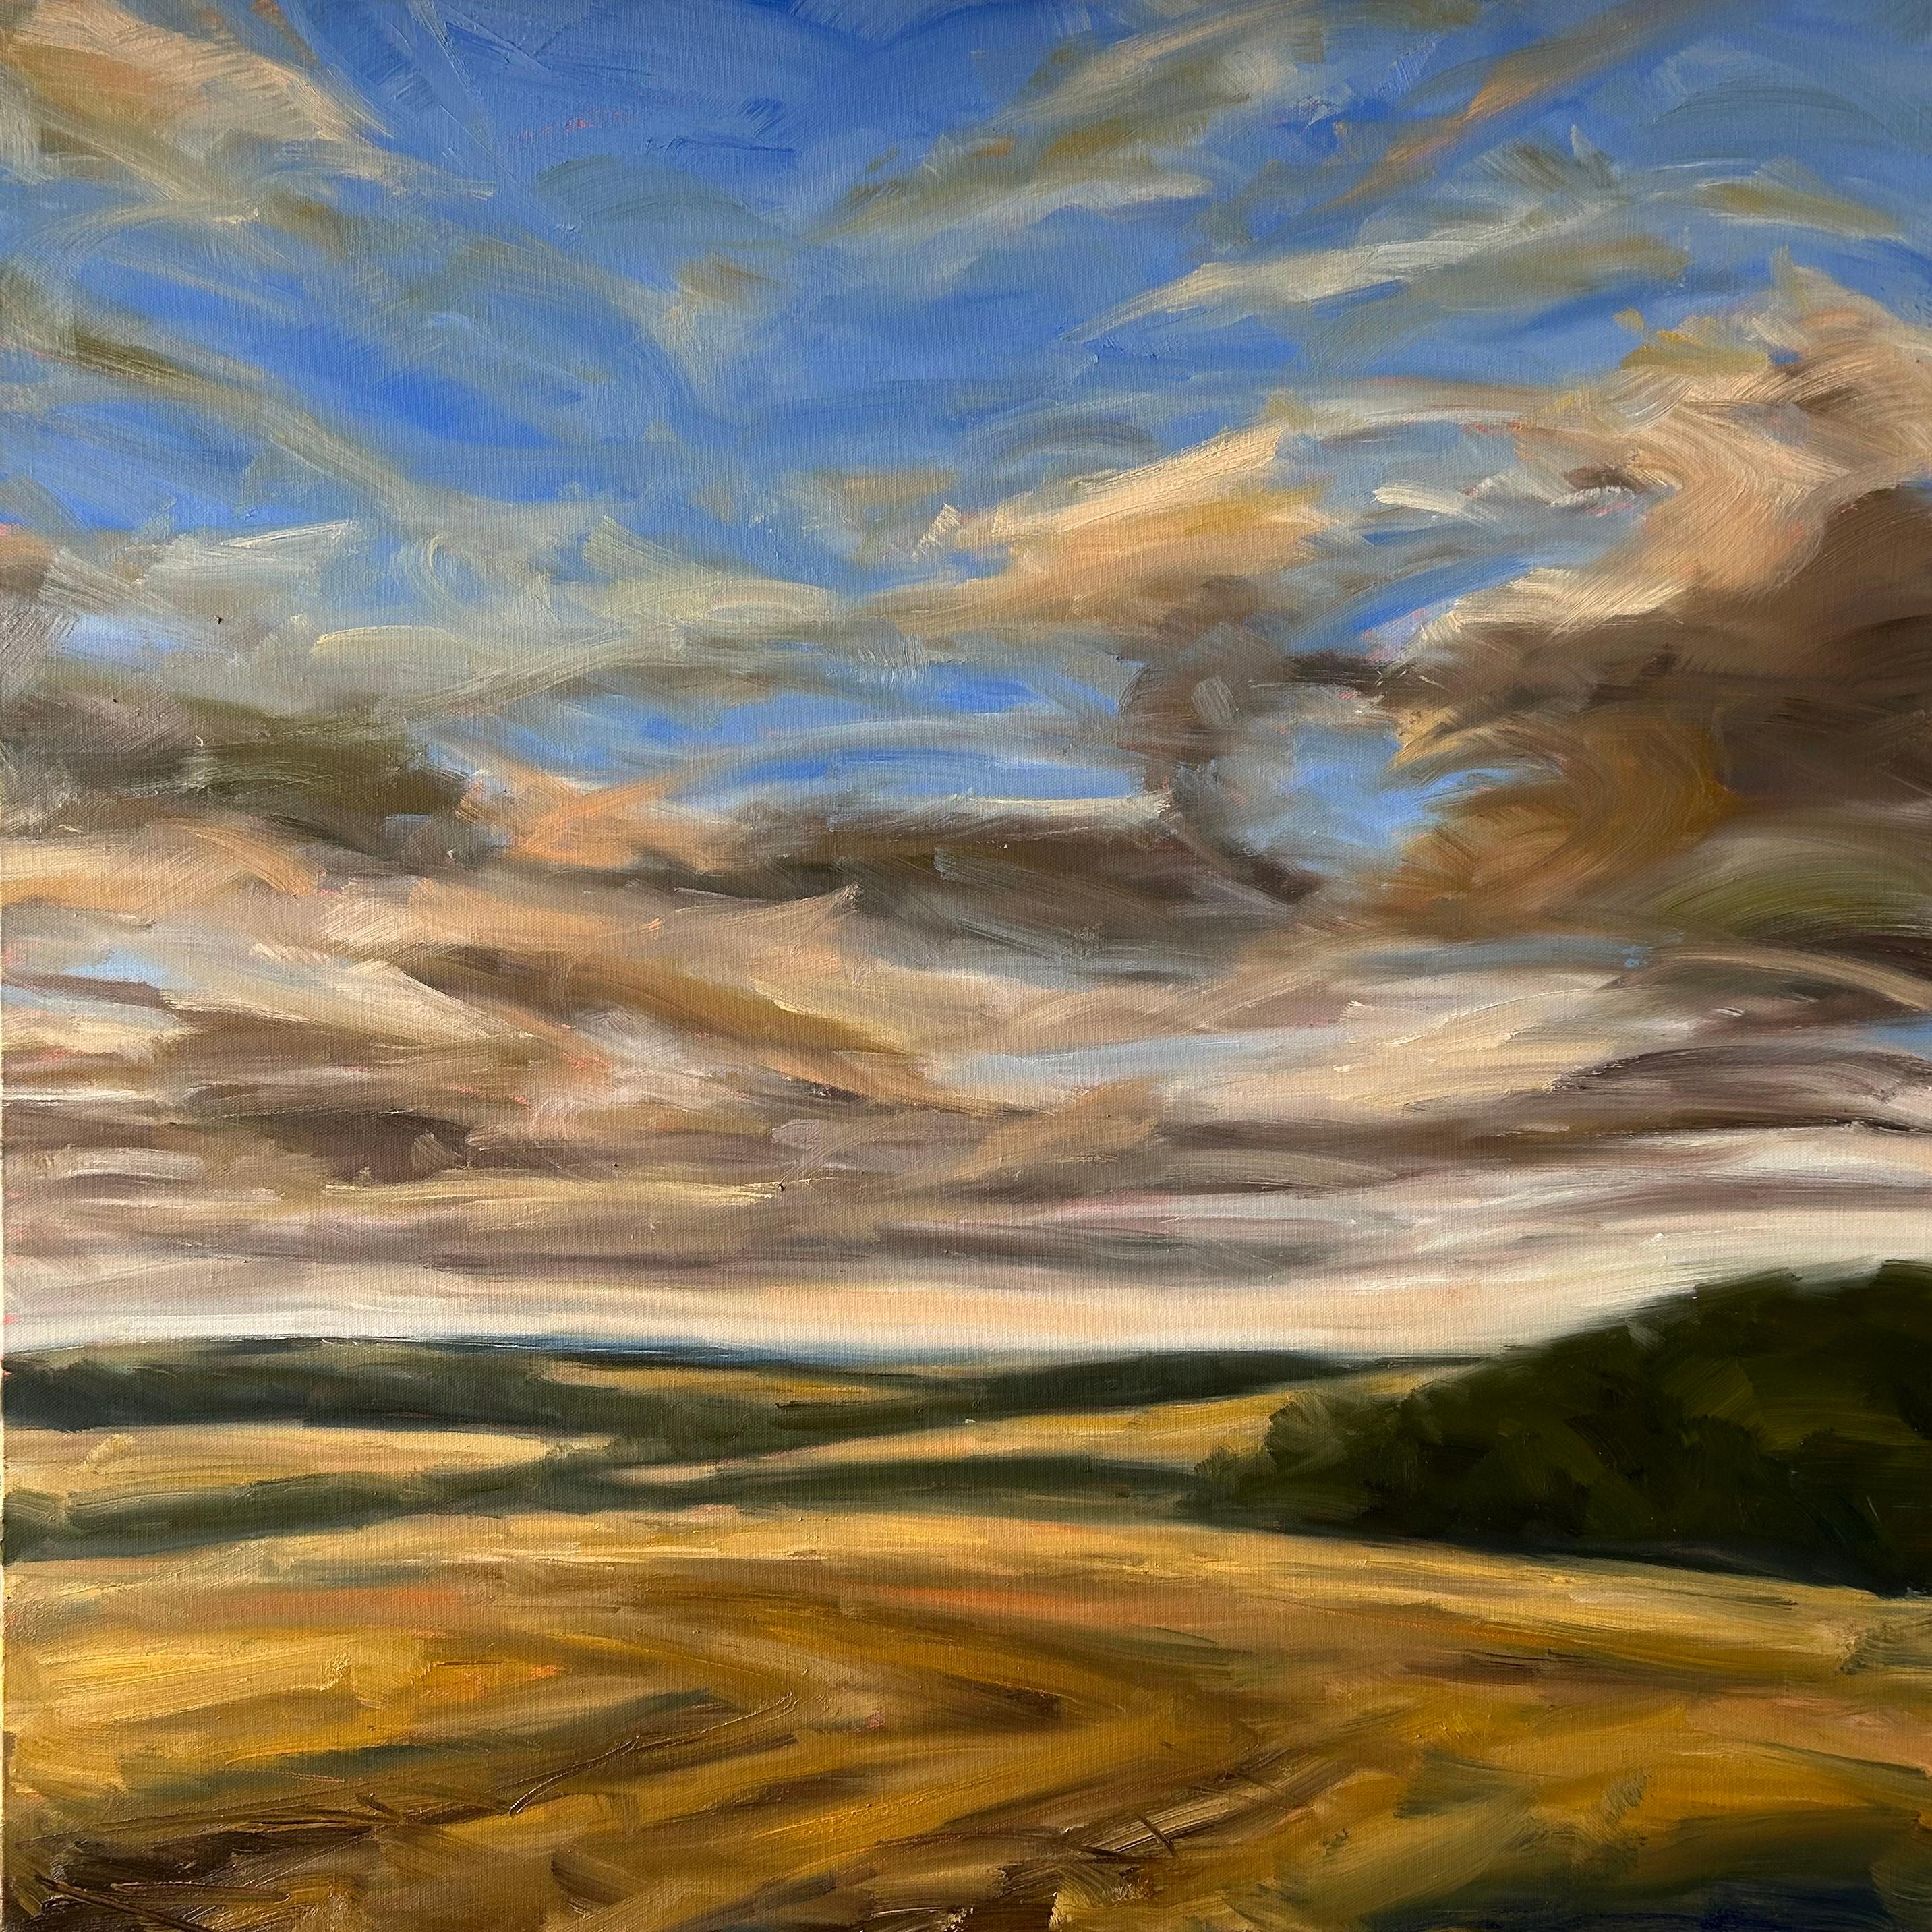 Oil on canvas painting by British landscape artist Suzanne Winn

Comes ready to hang in a bespoke, hand-painted wooden framed

Framed size 85cm x 85cm

This work features soft clouds swirling over a golden stubble field in late summer. A special